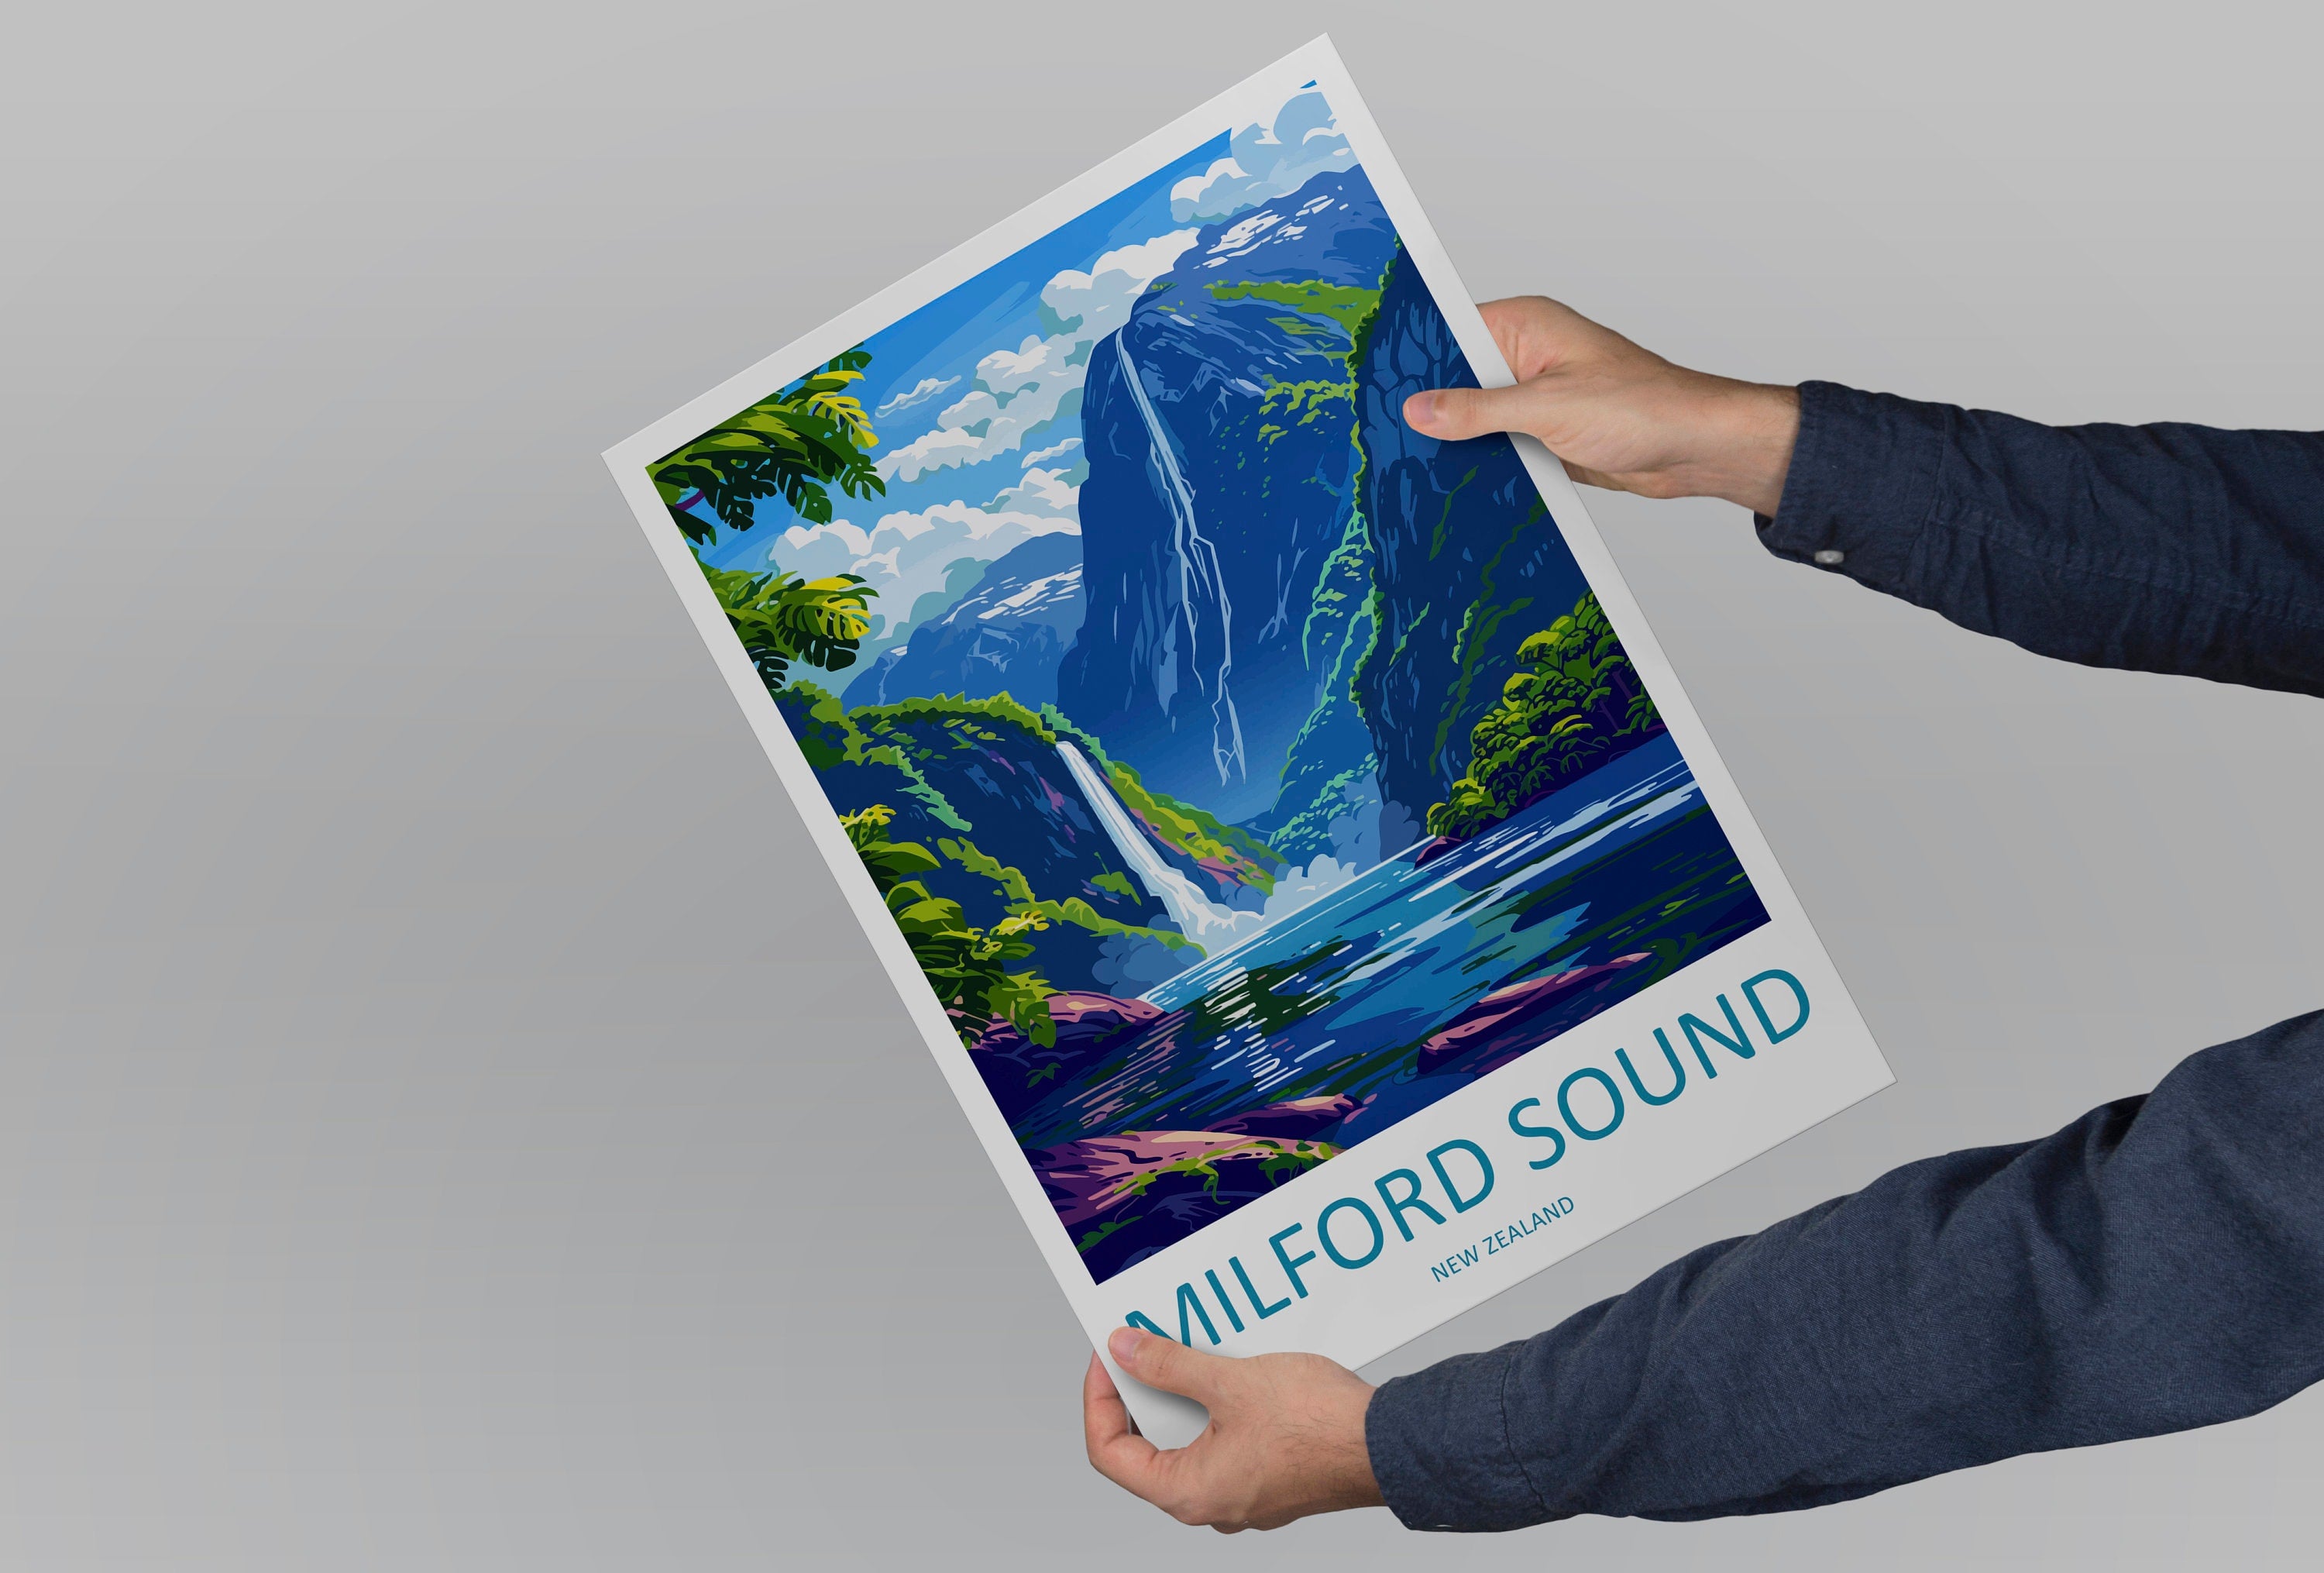 Milford Sound Travel Print Wall Art Milford Sound Wall Hanging Home Décor Milford Sound Gift Art Lovers New Zealand Art Lover Gift